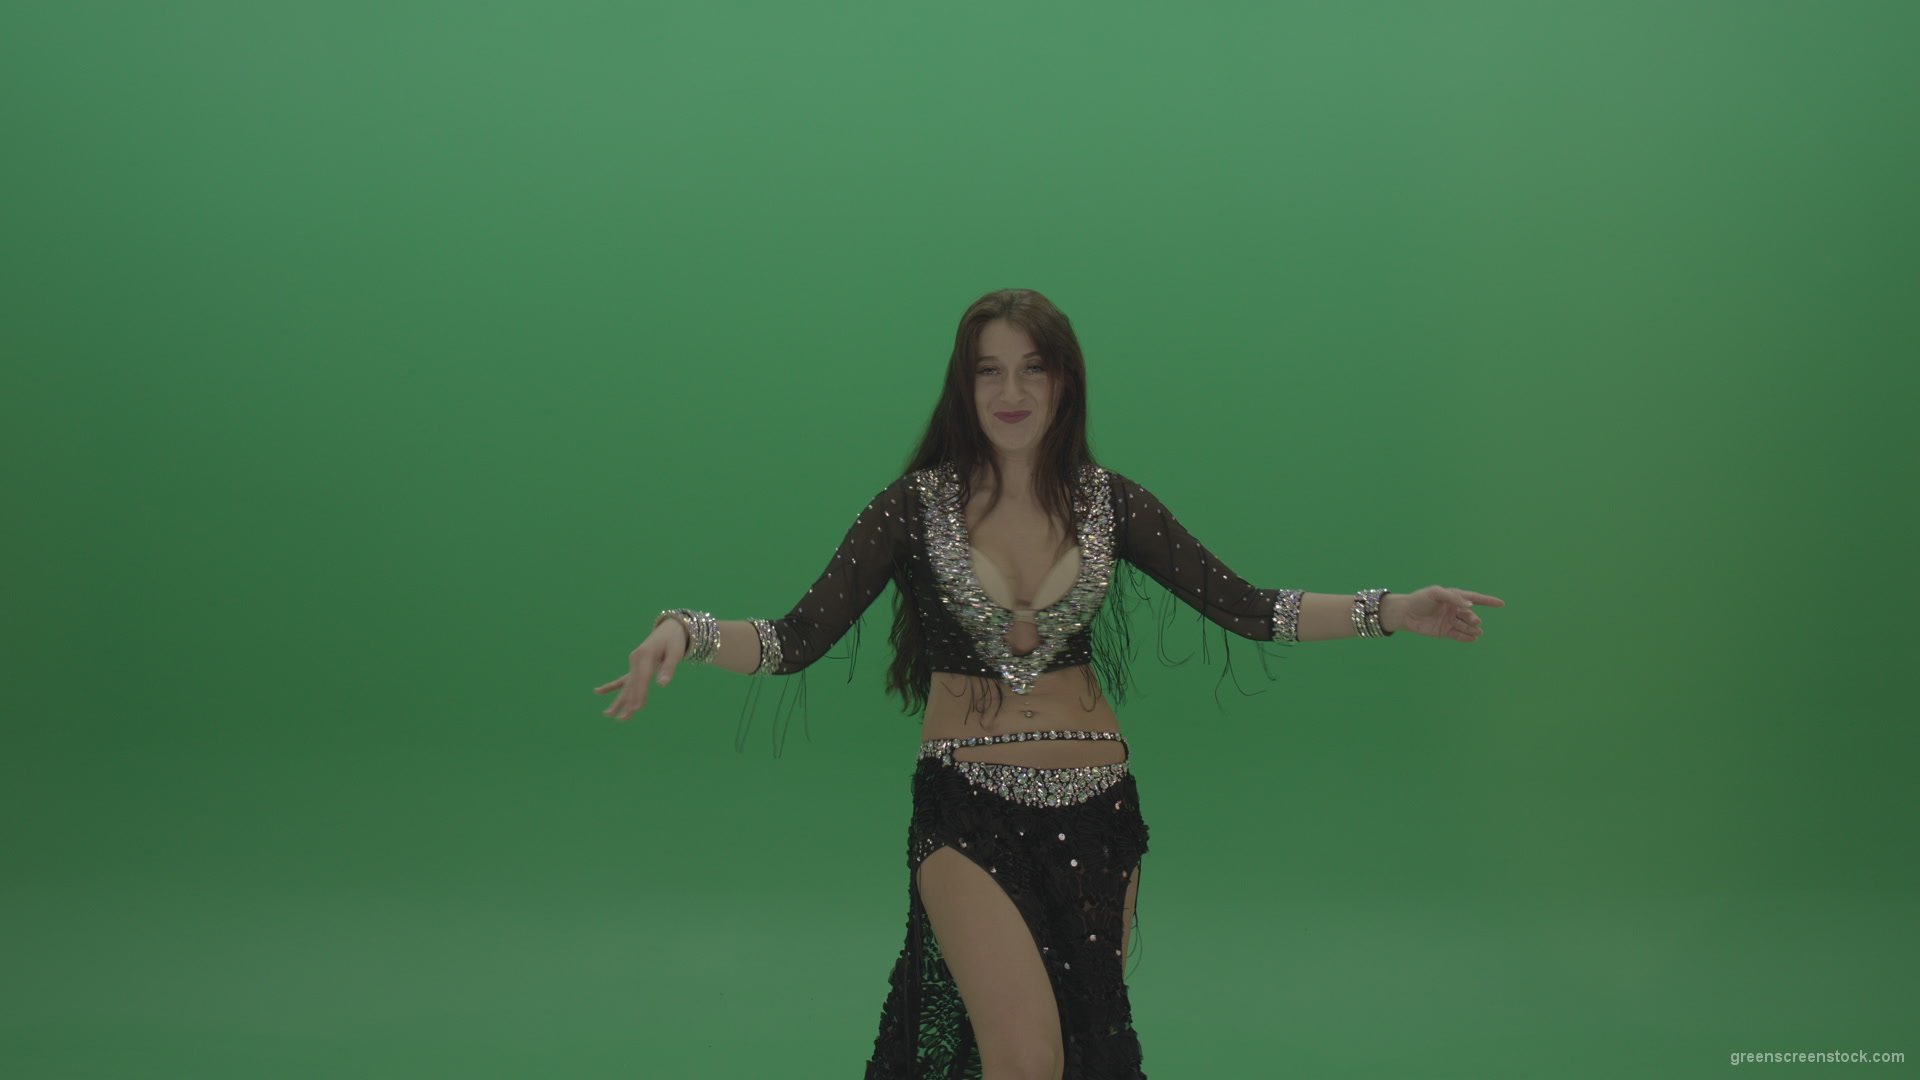 Refined-belly-dancer-in-black-wear-display-amazing-dance-moves-over-chromakey-background_006 Green Screen Stock